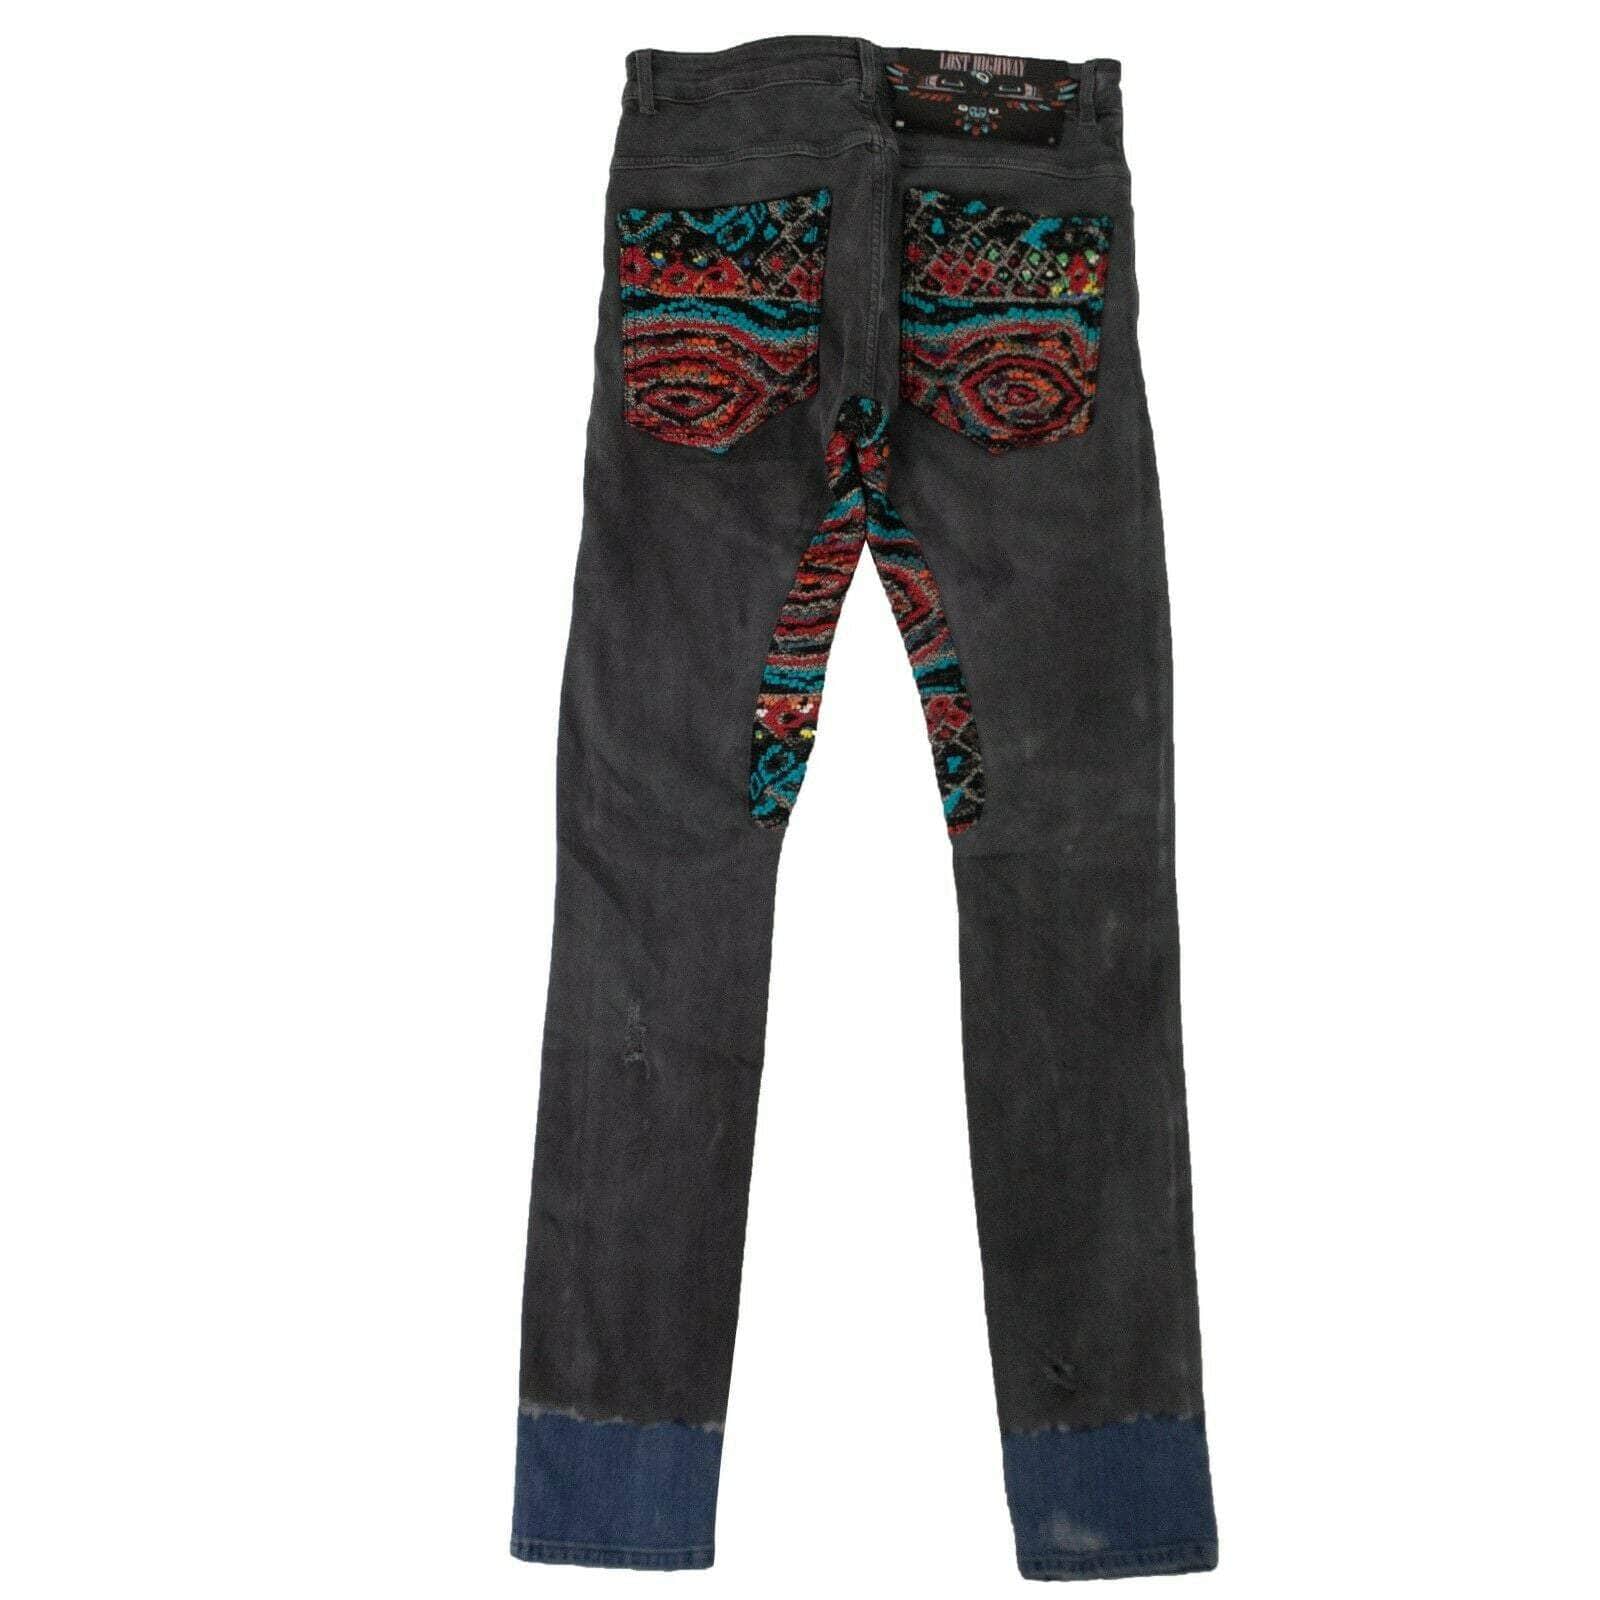 Alchemist 250-500, 500-750, alchemist, chicmi, couponcollection, gender-mens, main-clothing, mens-jeans, mens-shoes, mens-skinny-jeans, size-30, size-31, size-32, size-33, size-34 Dino Jacquard And Dip Dyed Jeans - Gray